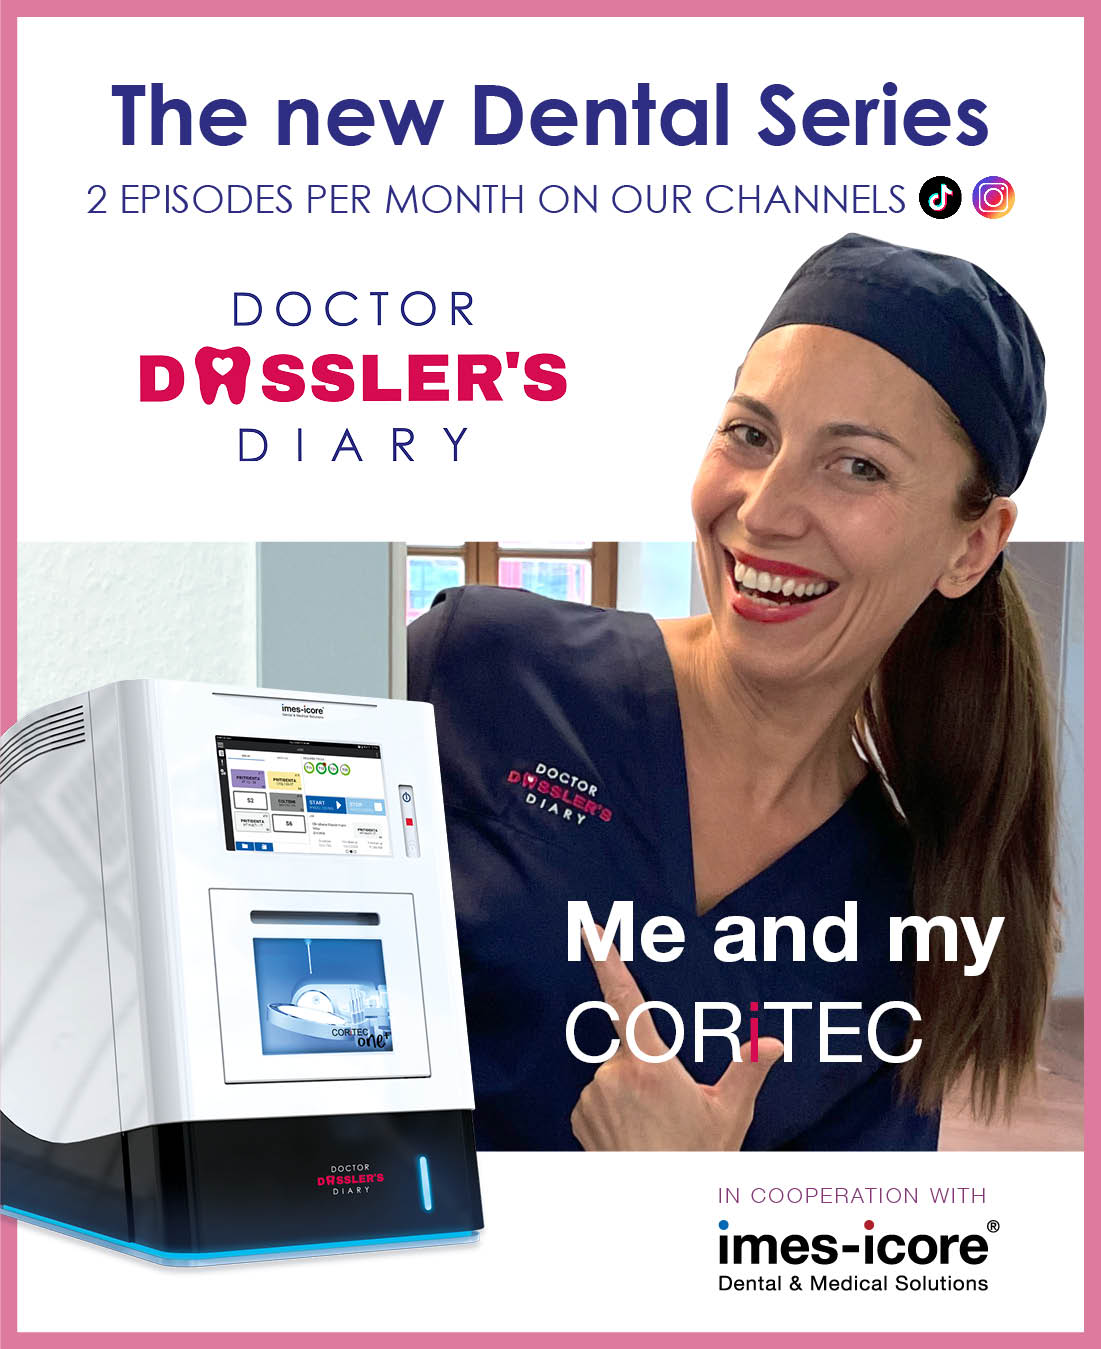 Headline: Dr. Dassler's Diary - The new dental series, picture: smiling woman with dental milling machine CORiTEC one+ in the foreground, Me and my CORiTEC from imes-icore